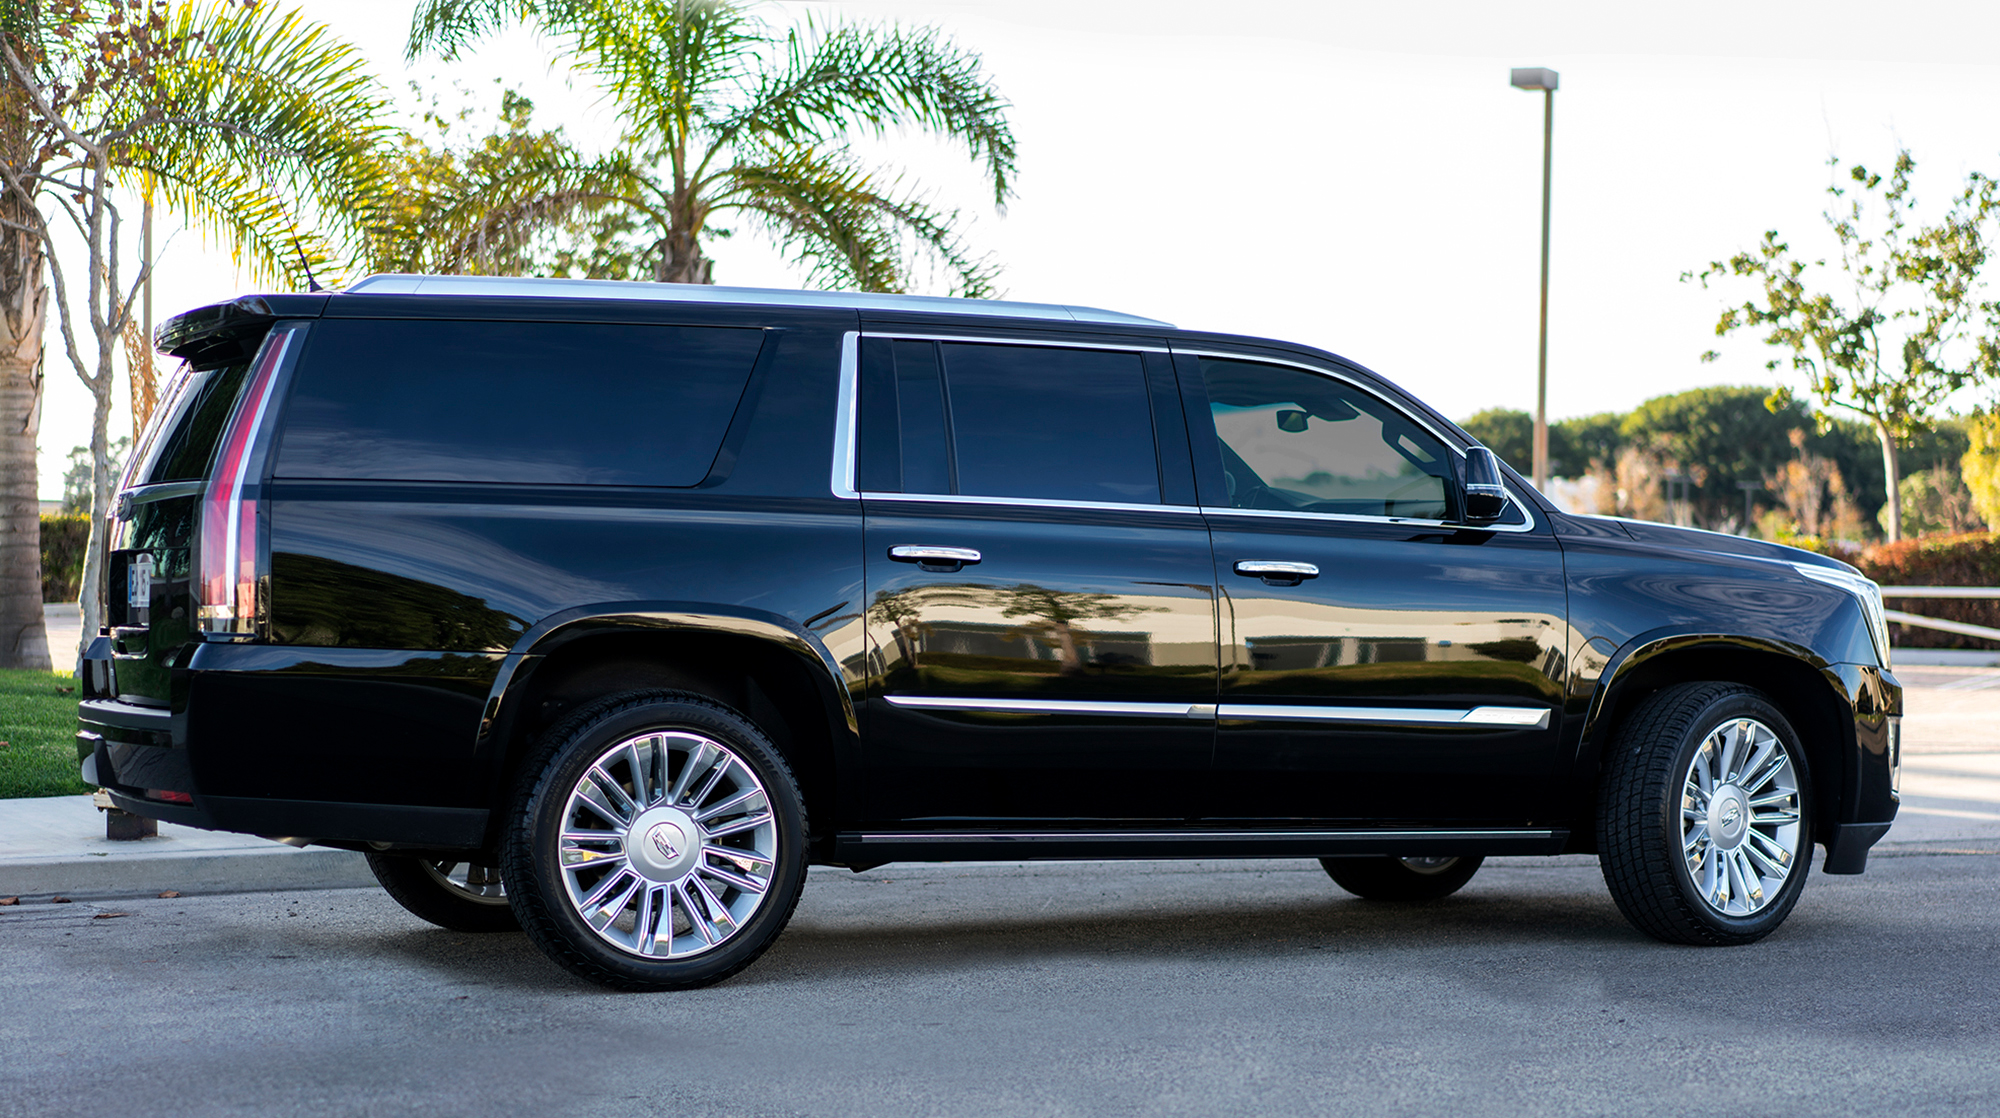 In this gallery, you’ll find an example of past custom Cadillac Escalade ES...